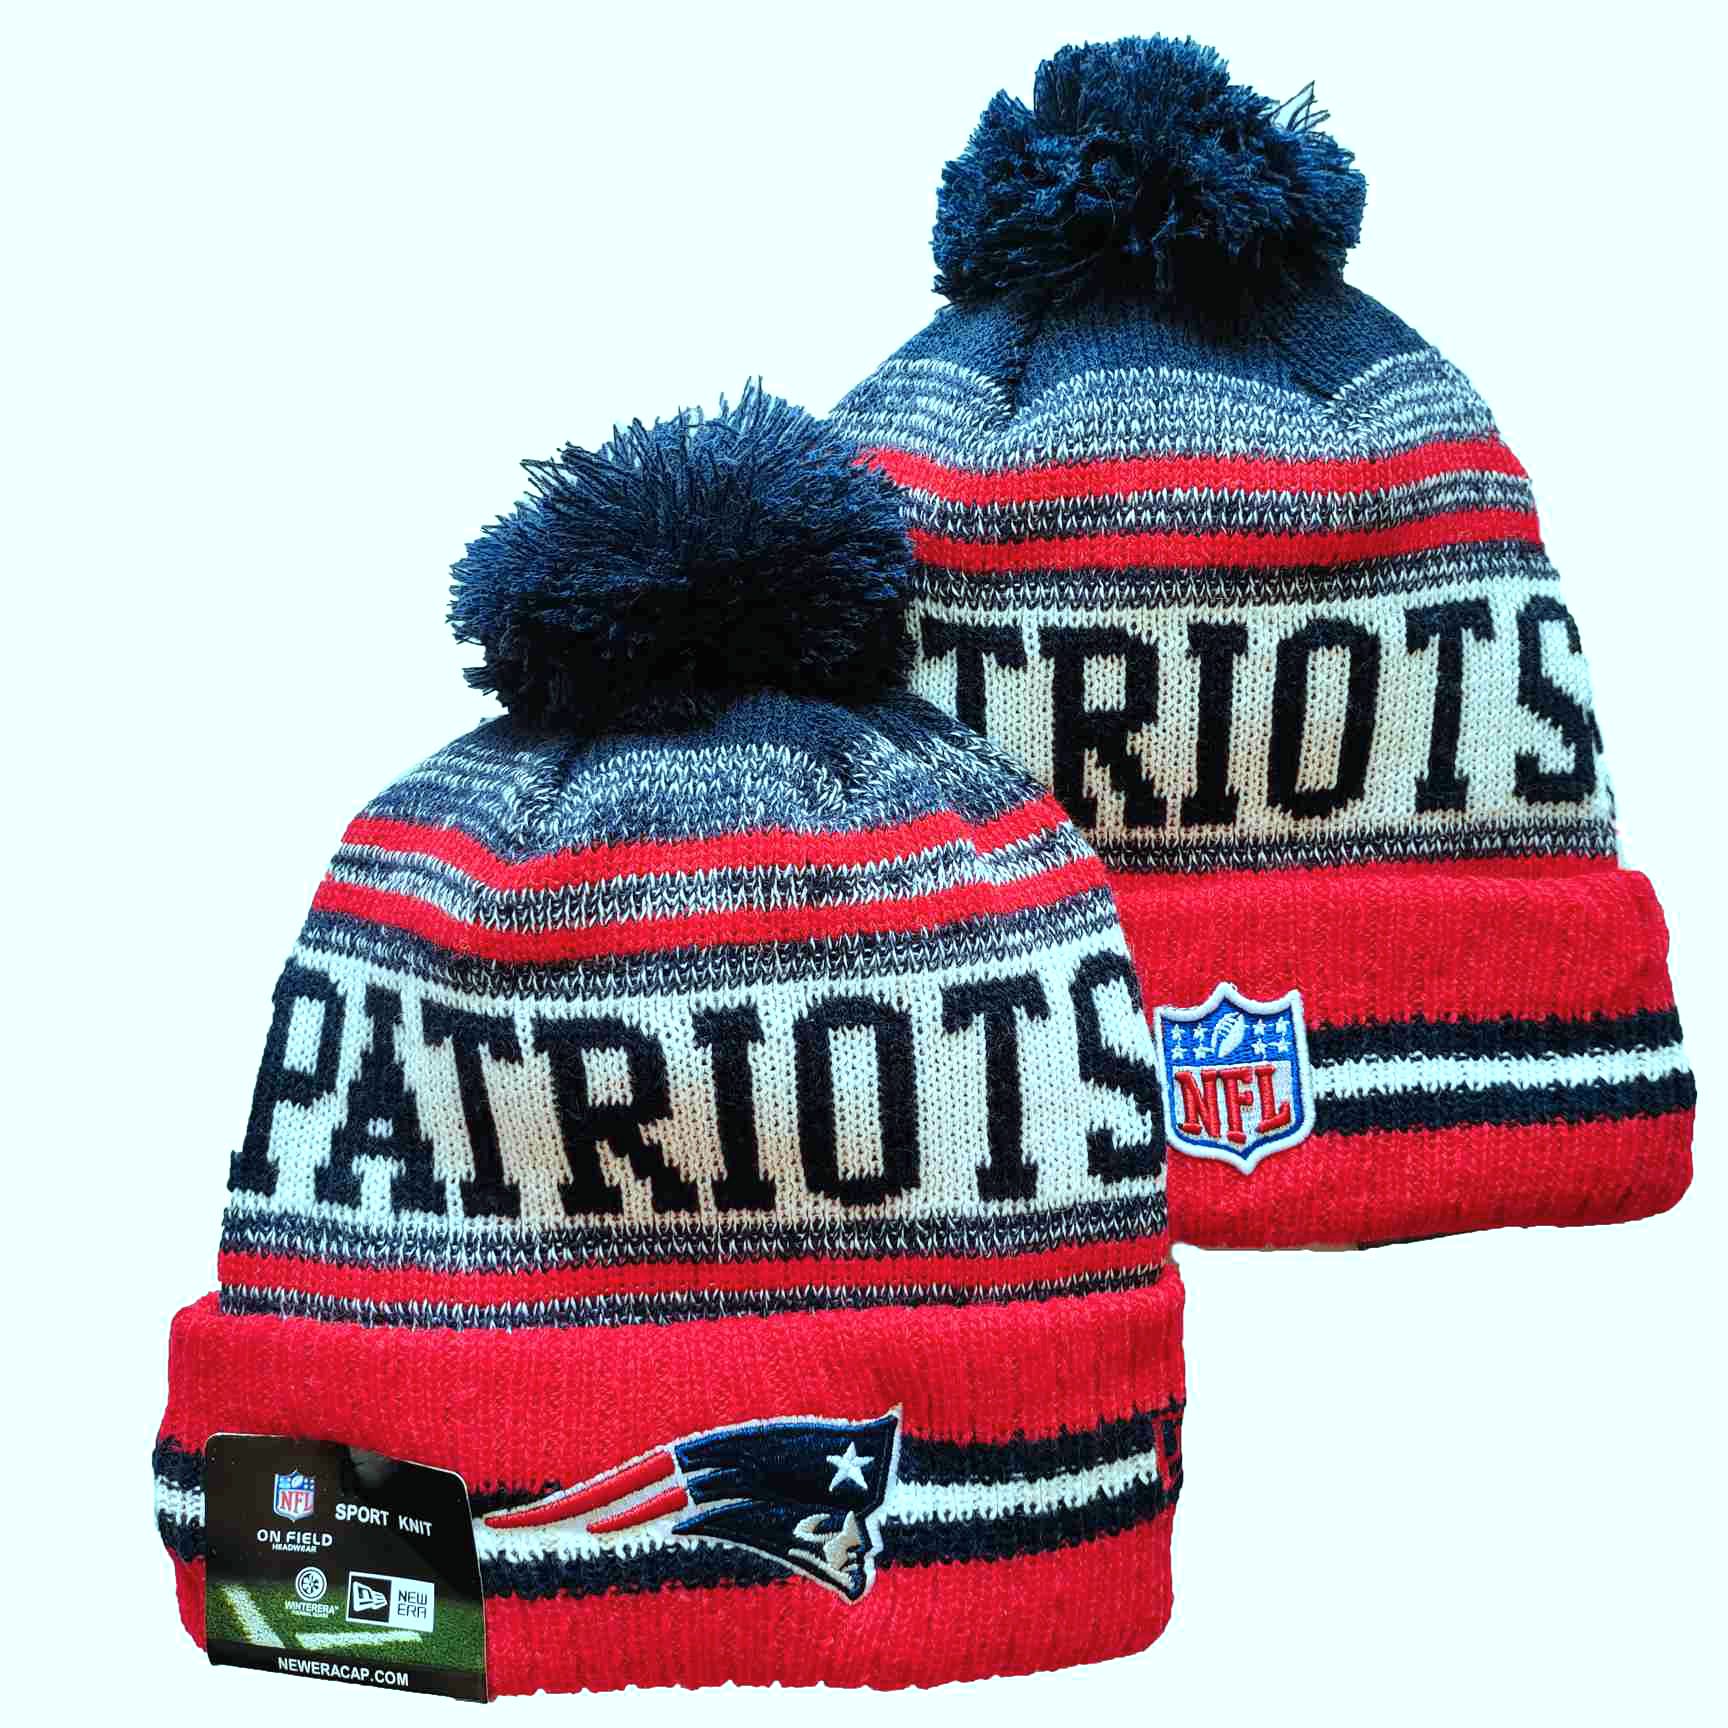 NFL New England Patriots Beanies Knit Hats-YD1244